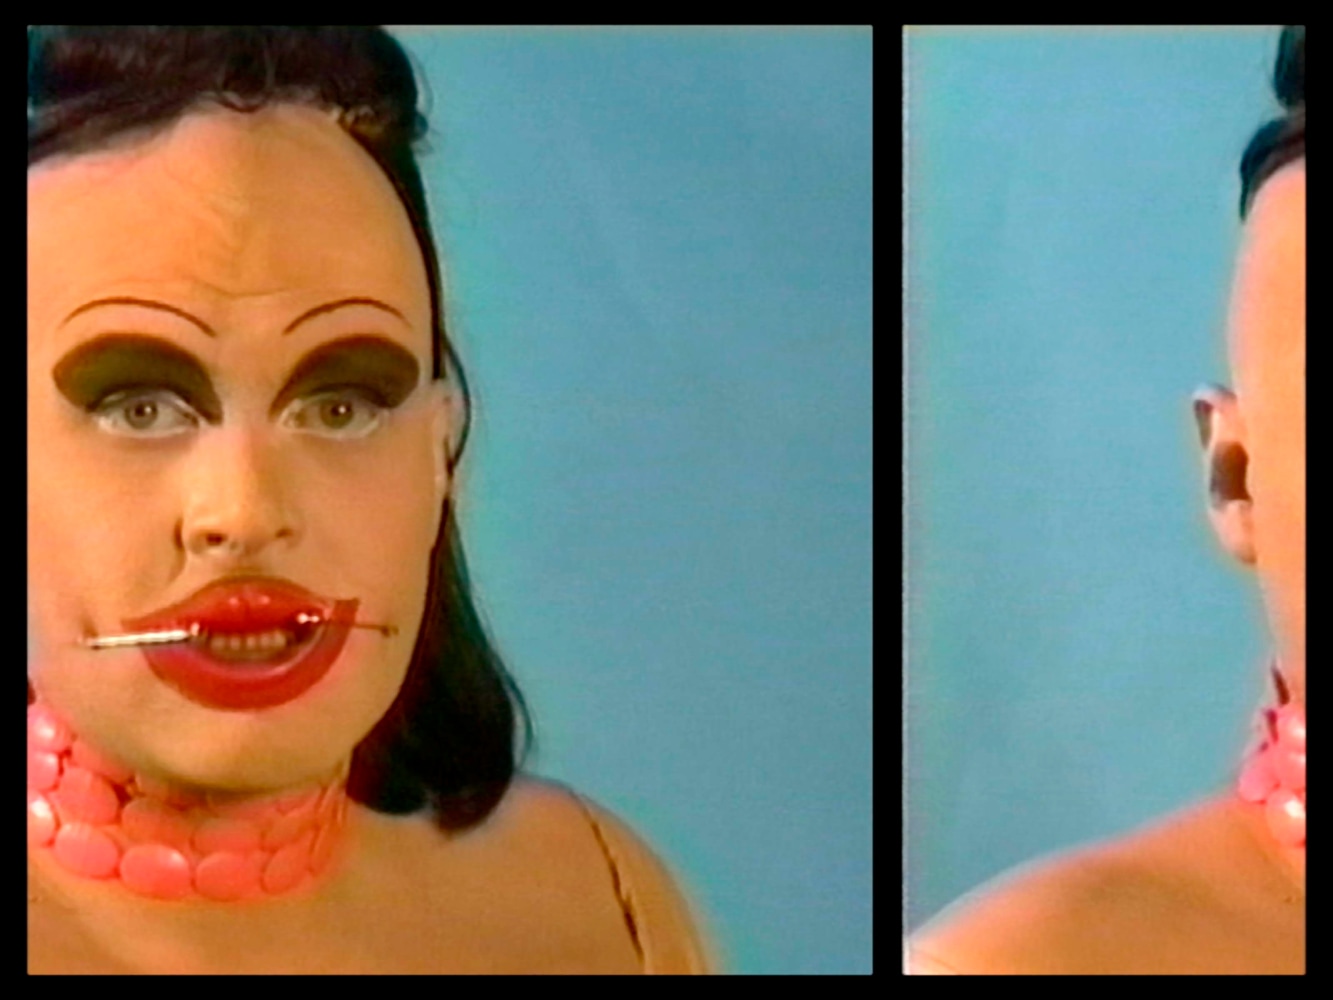 Charles Atlas
Teach, 1992/1998
Single-channel video projection, sound
Duration: 7 minutes, 47 seconds